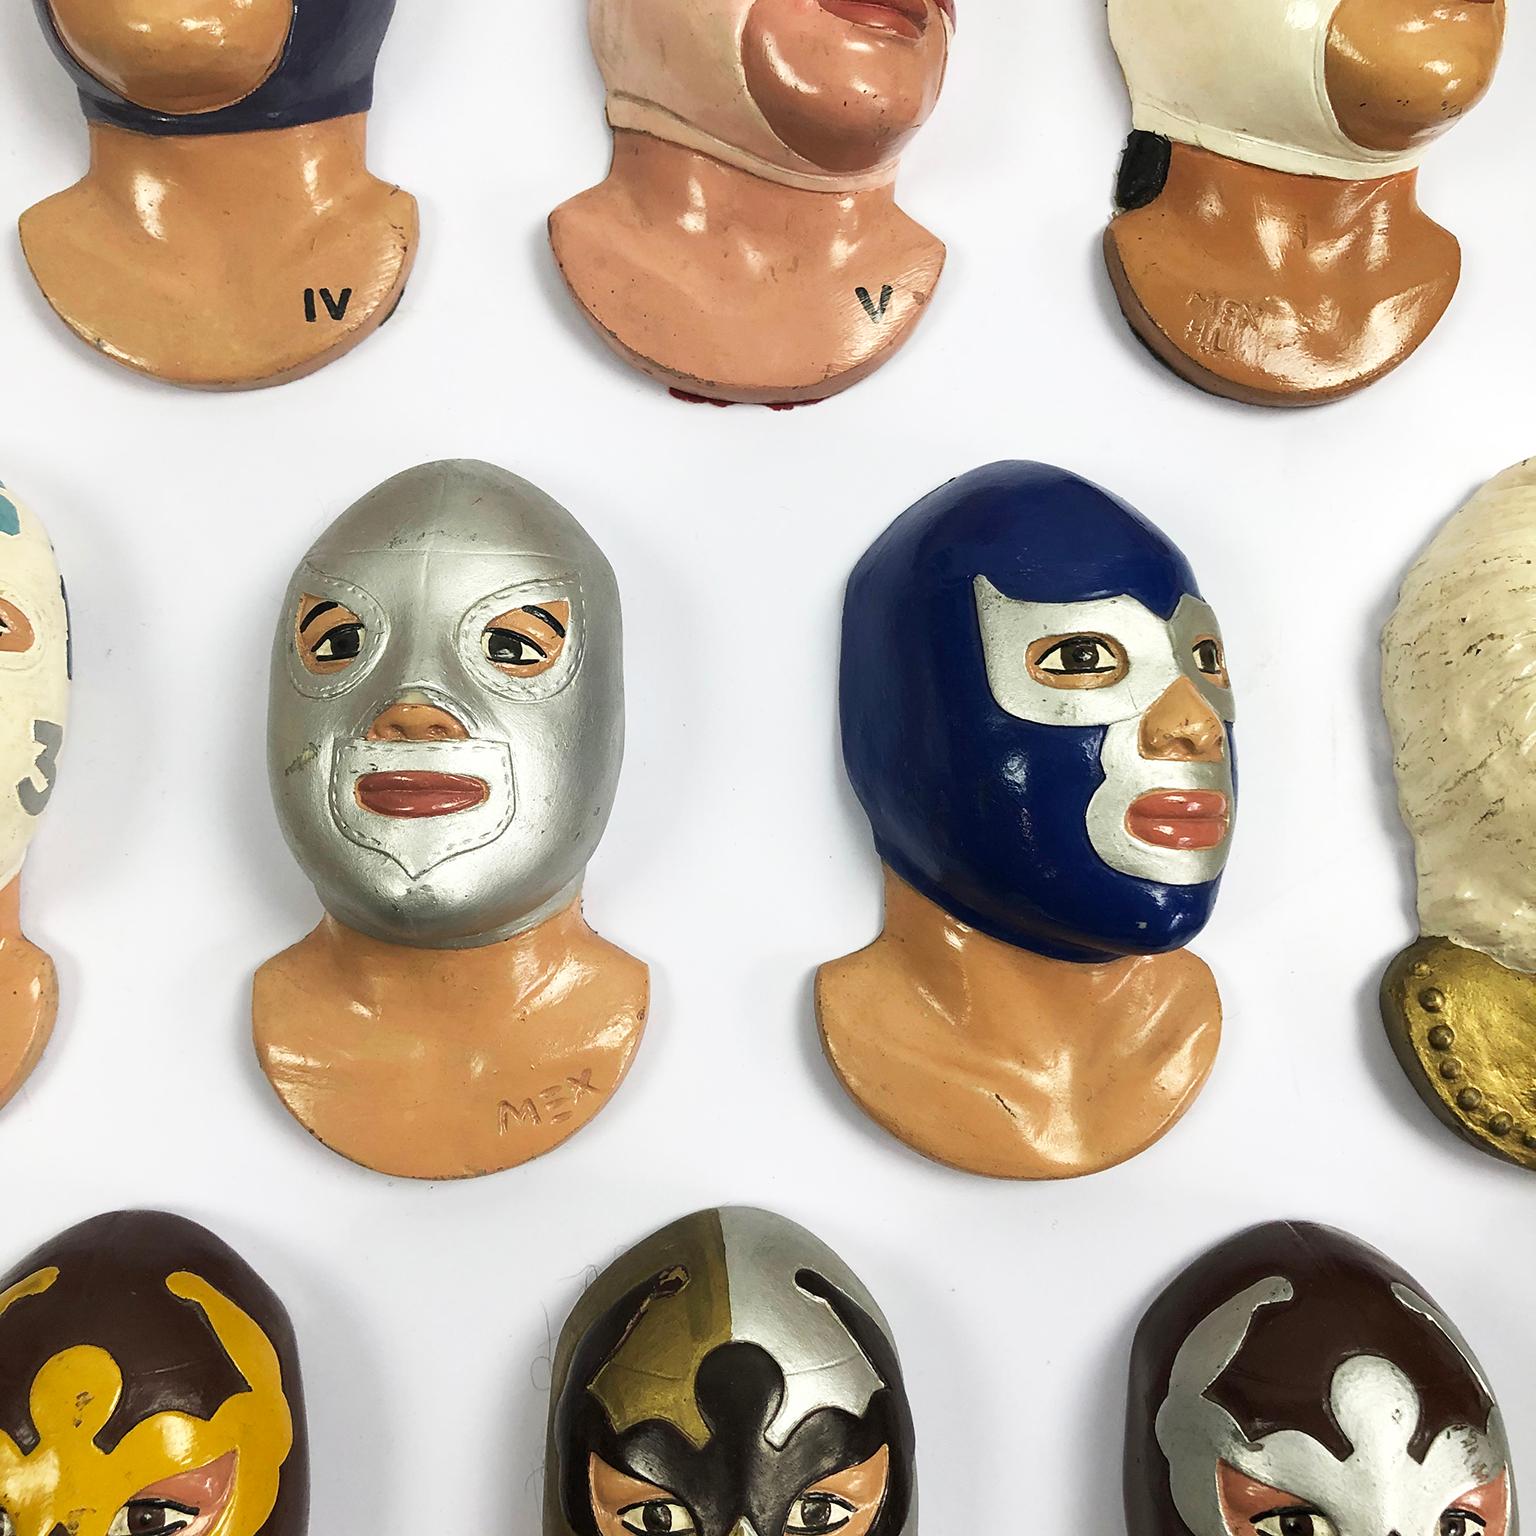 We offer this fantastic set of 67 of the most iconic Mexican wrestling fighters, made in recine and hand painted includes El Santo, Blue Demon, Rayo de Jalisco, Mil Mascaras, Los 5 brazos, Tinieblas y Aluche among others, circa 1970.